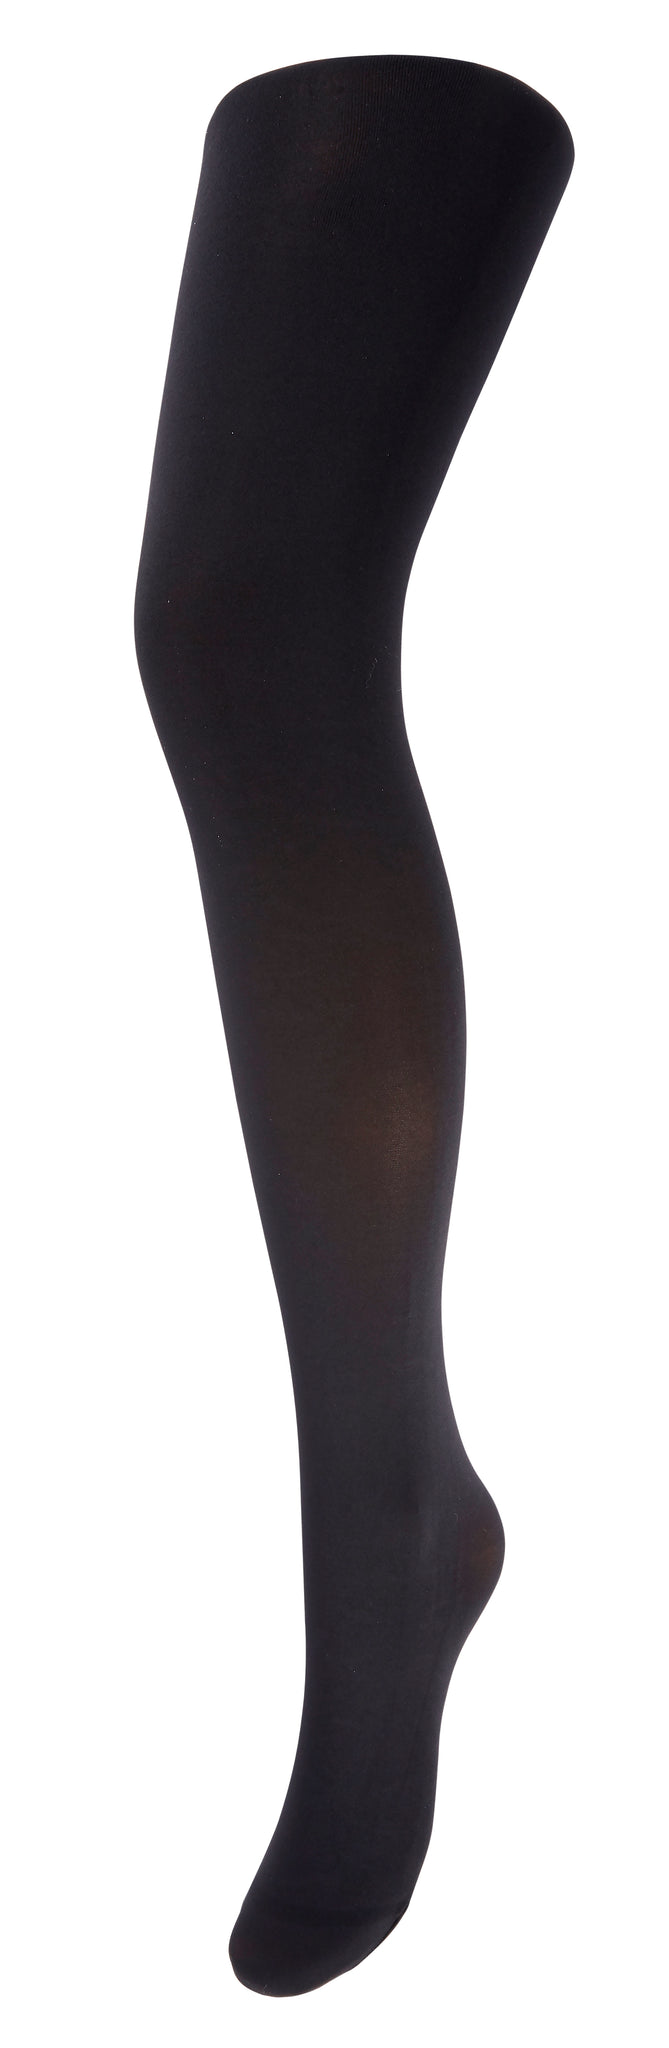 Bums n Tums Control Tights - Ms. Shape